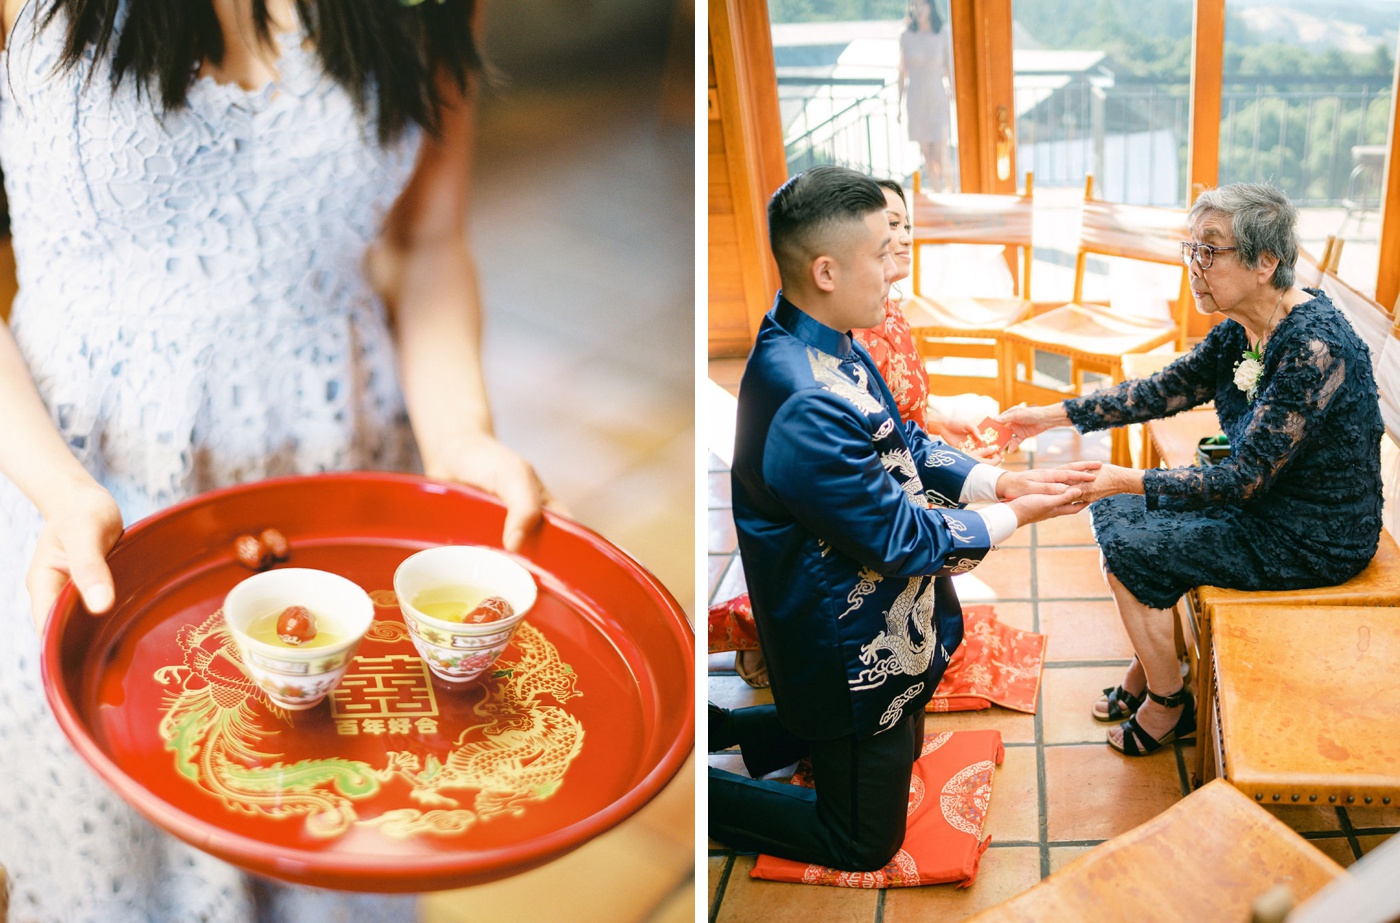 Traditional tea ceremony at a Northern California wedding